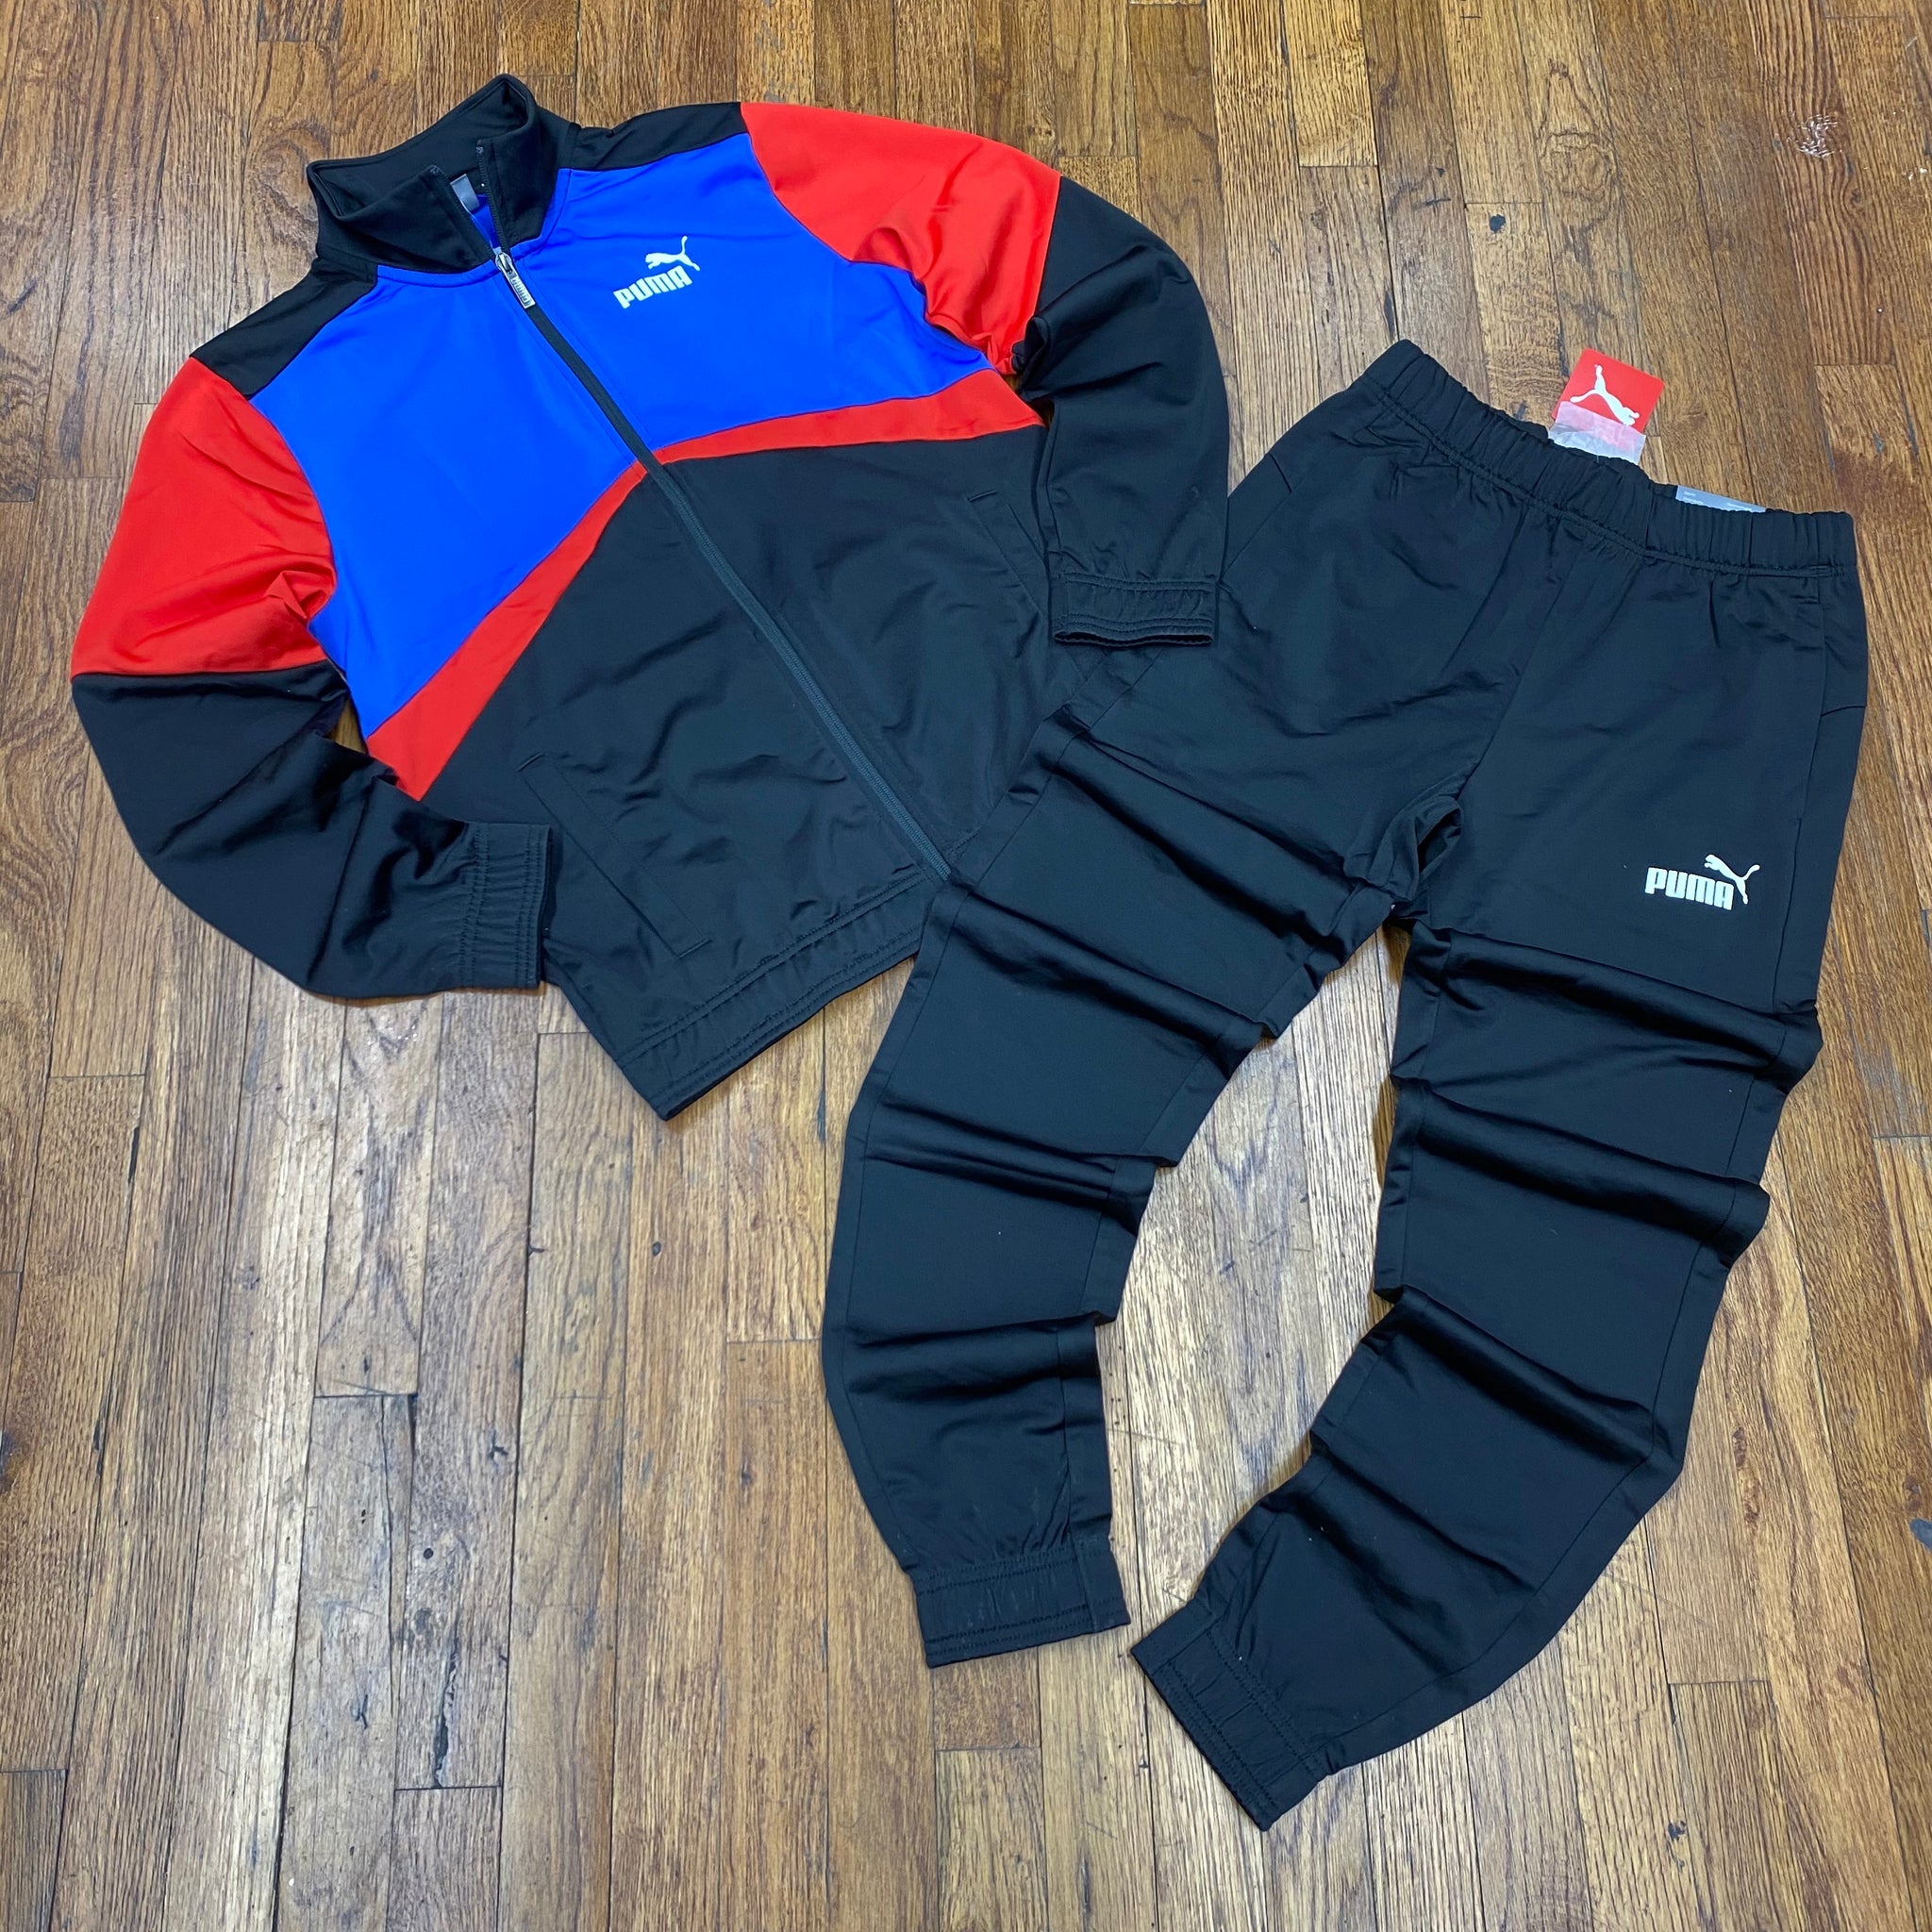 red and black puma sweatsuit